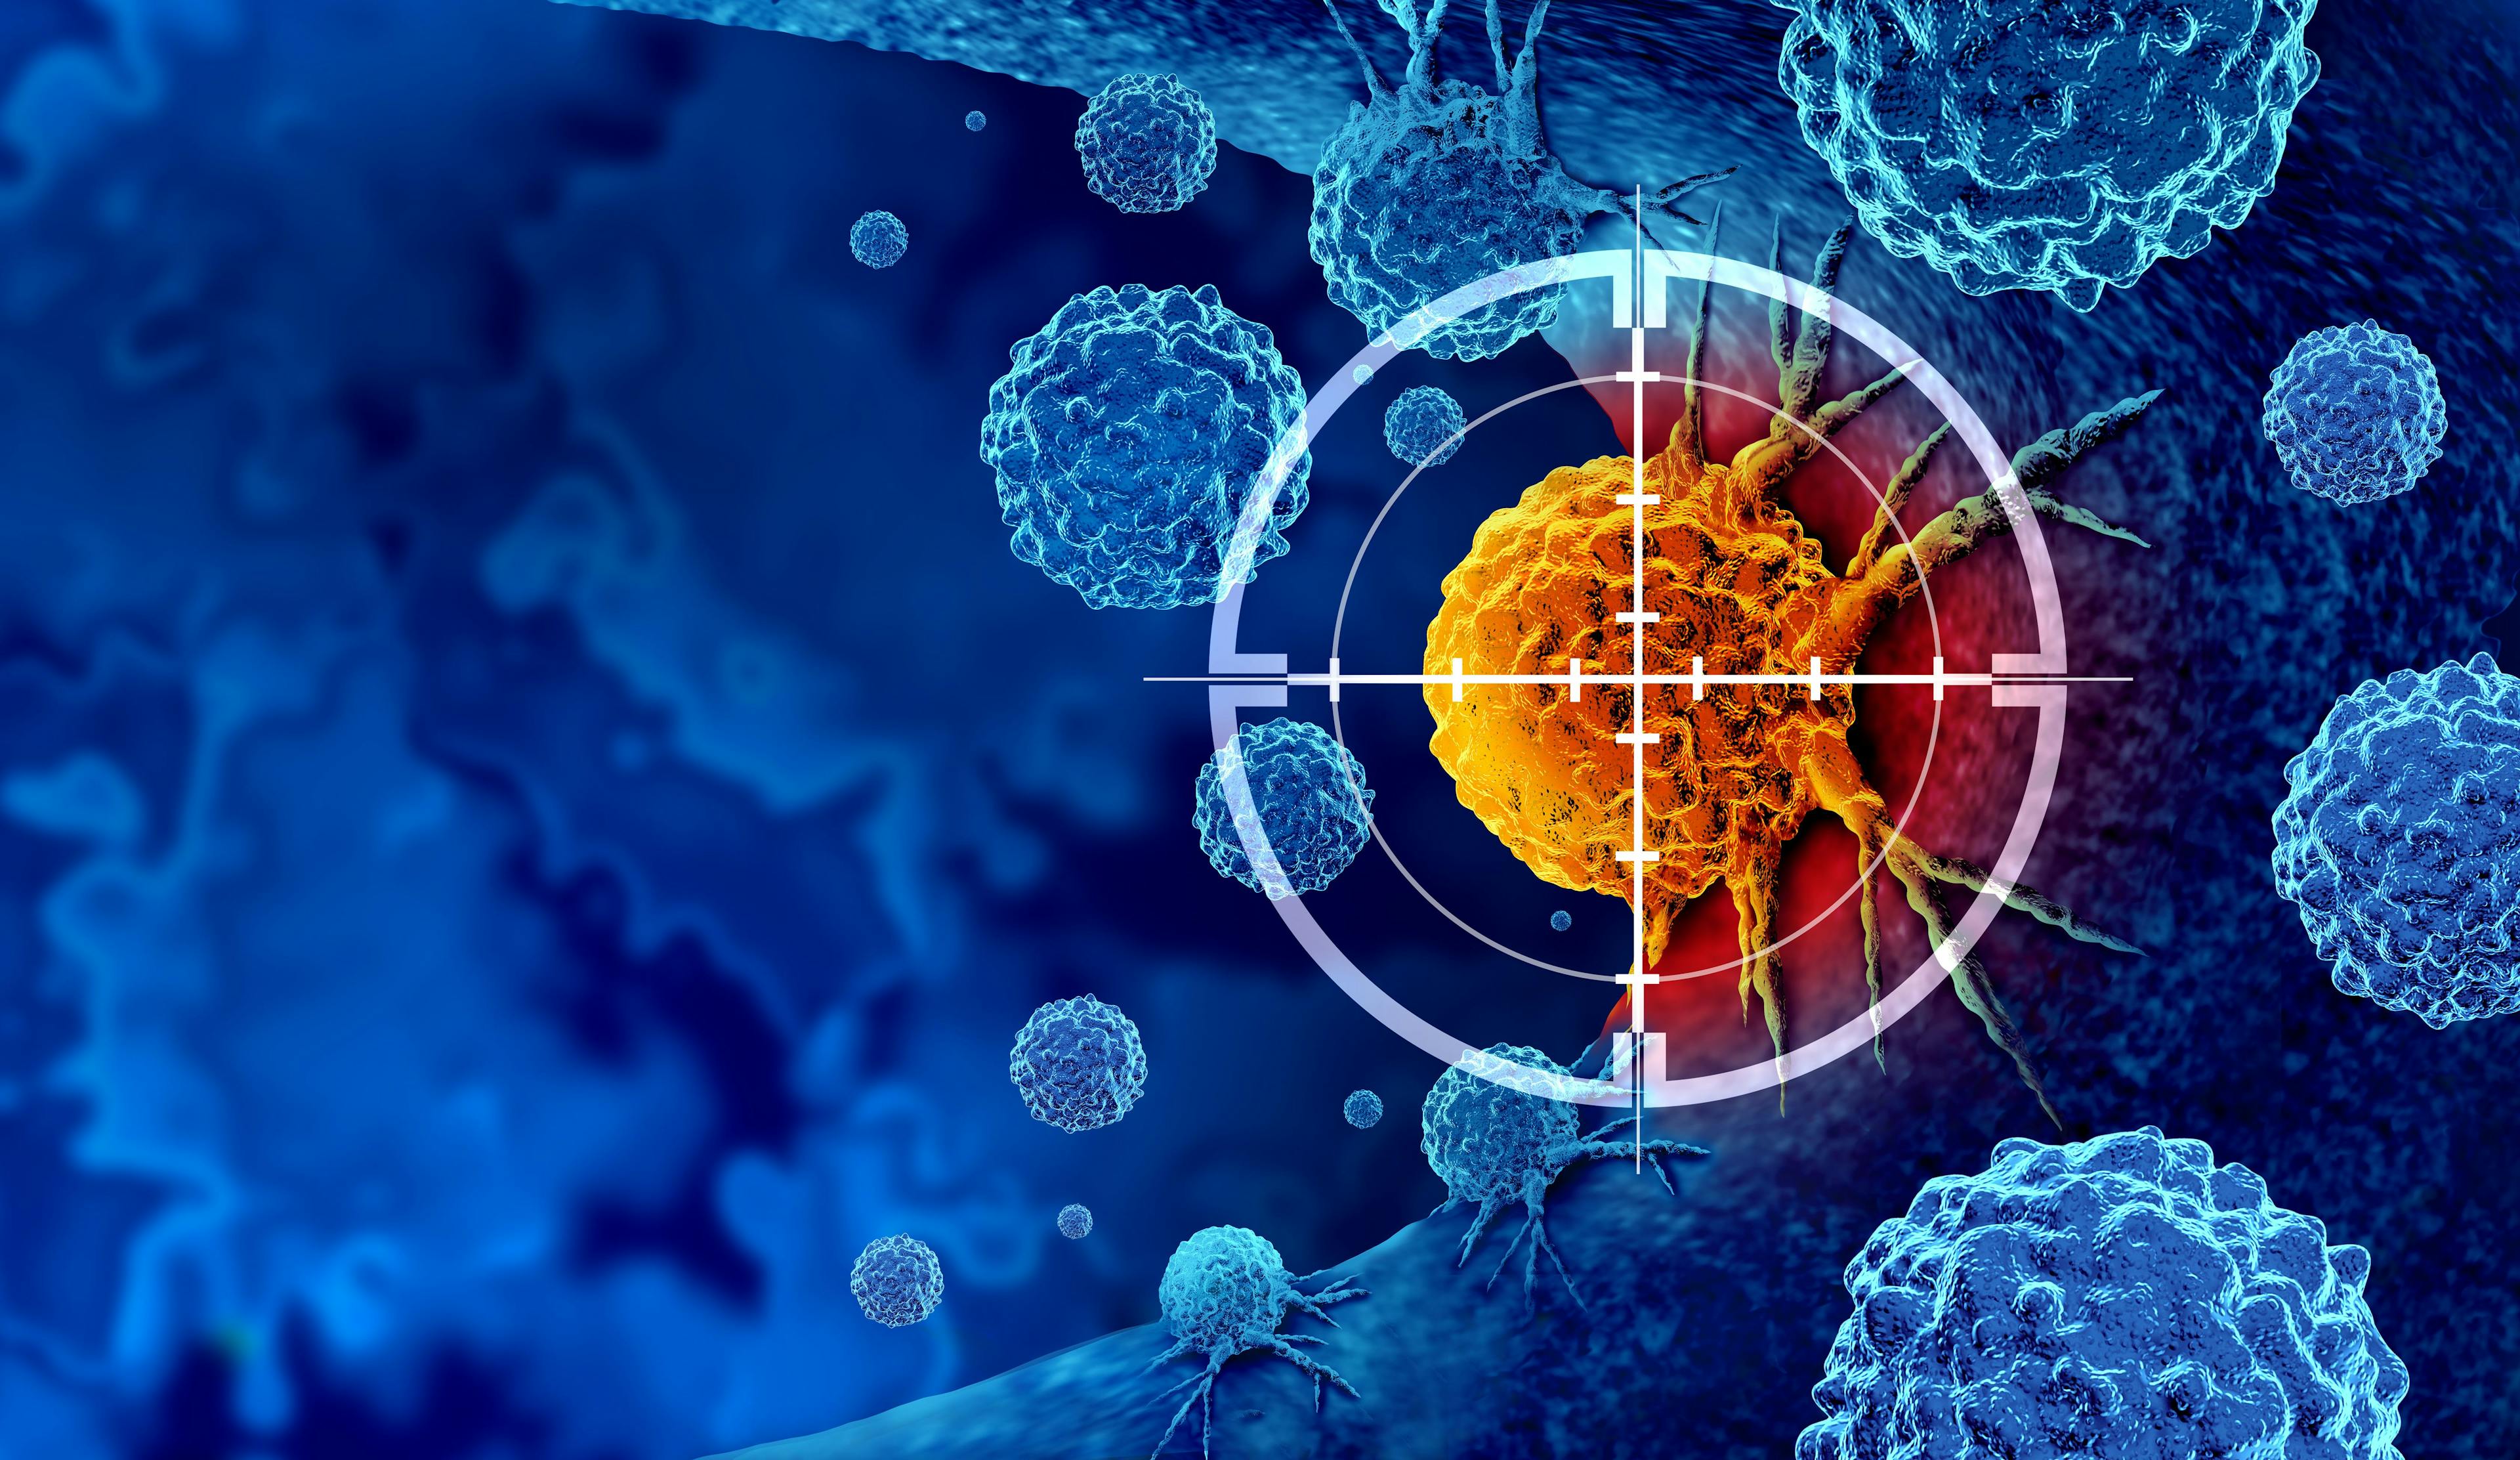 Cancer detection and screening as a treatment for malignant cells with a biopsy or testing caused by carcinogens and genetics with a cancerous cell as an immunotherapy symbol - Image Credit: © freshidea [stock.adobe.com]